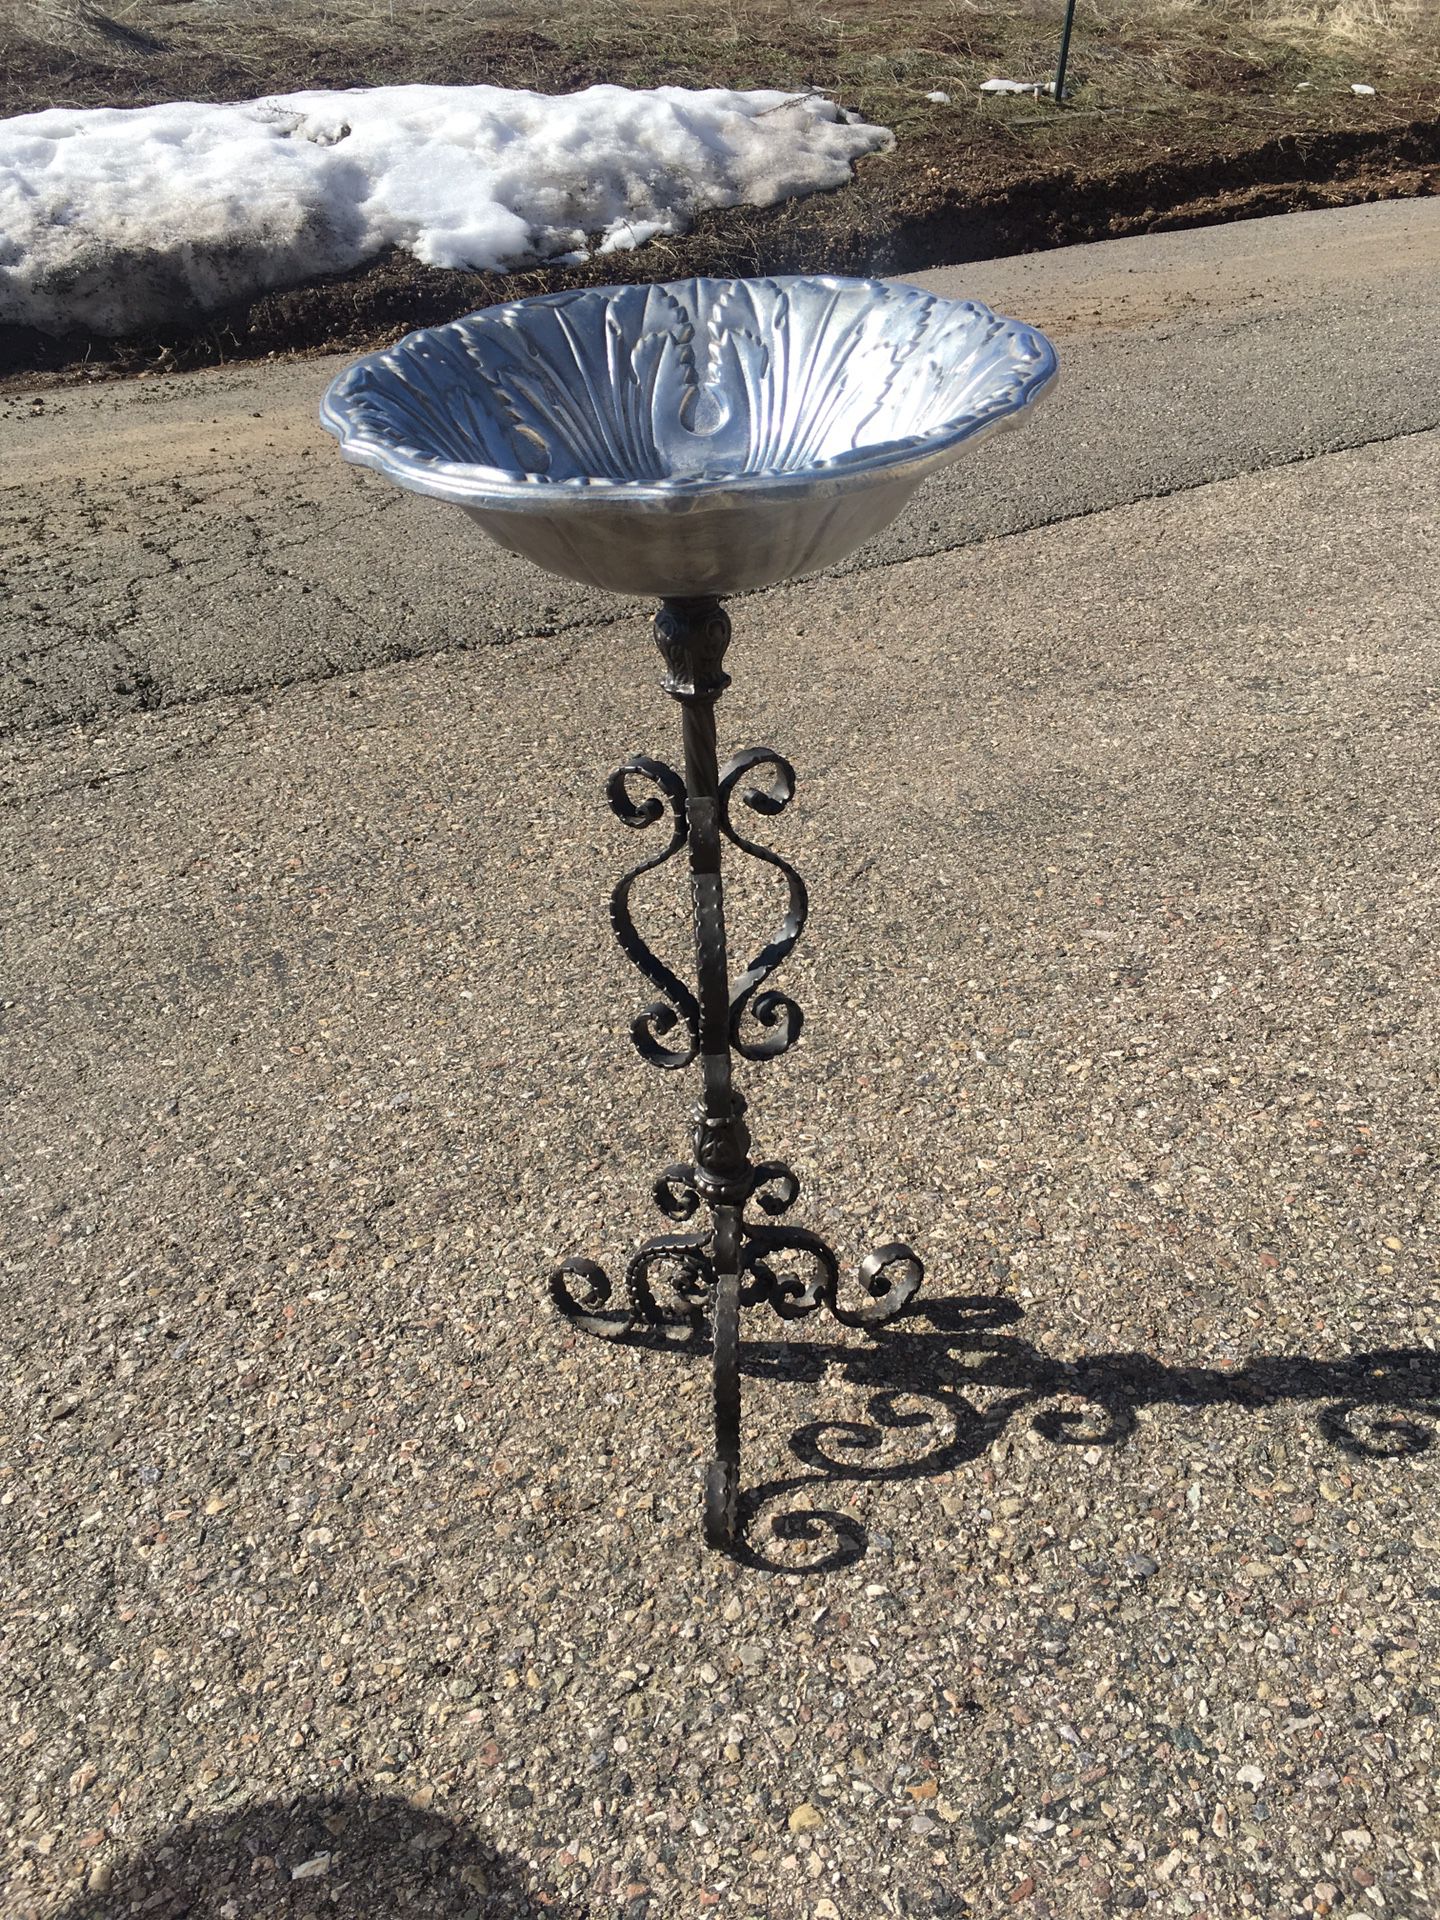 Bird Bath Feeder- Pewter Ornate Flowered Dish "The Wilton Company" with Wrought Iron Heavy Stand!